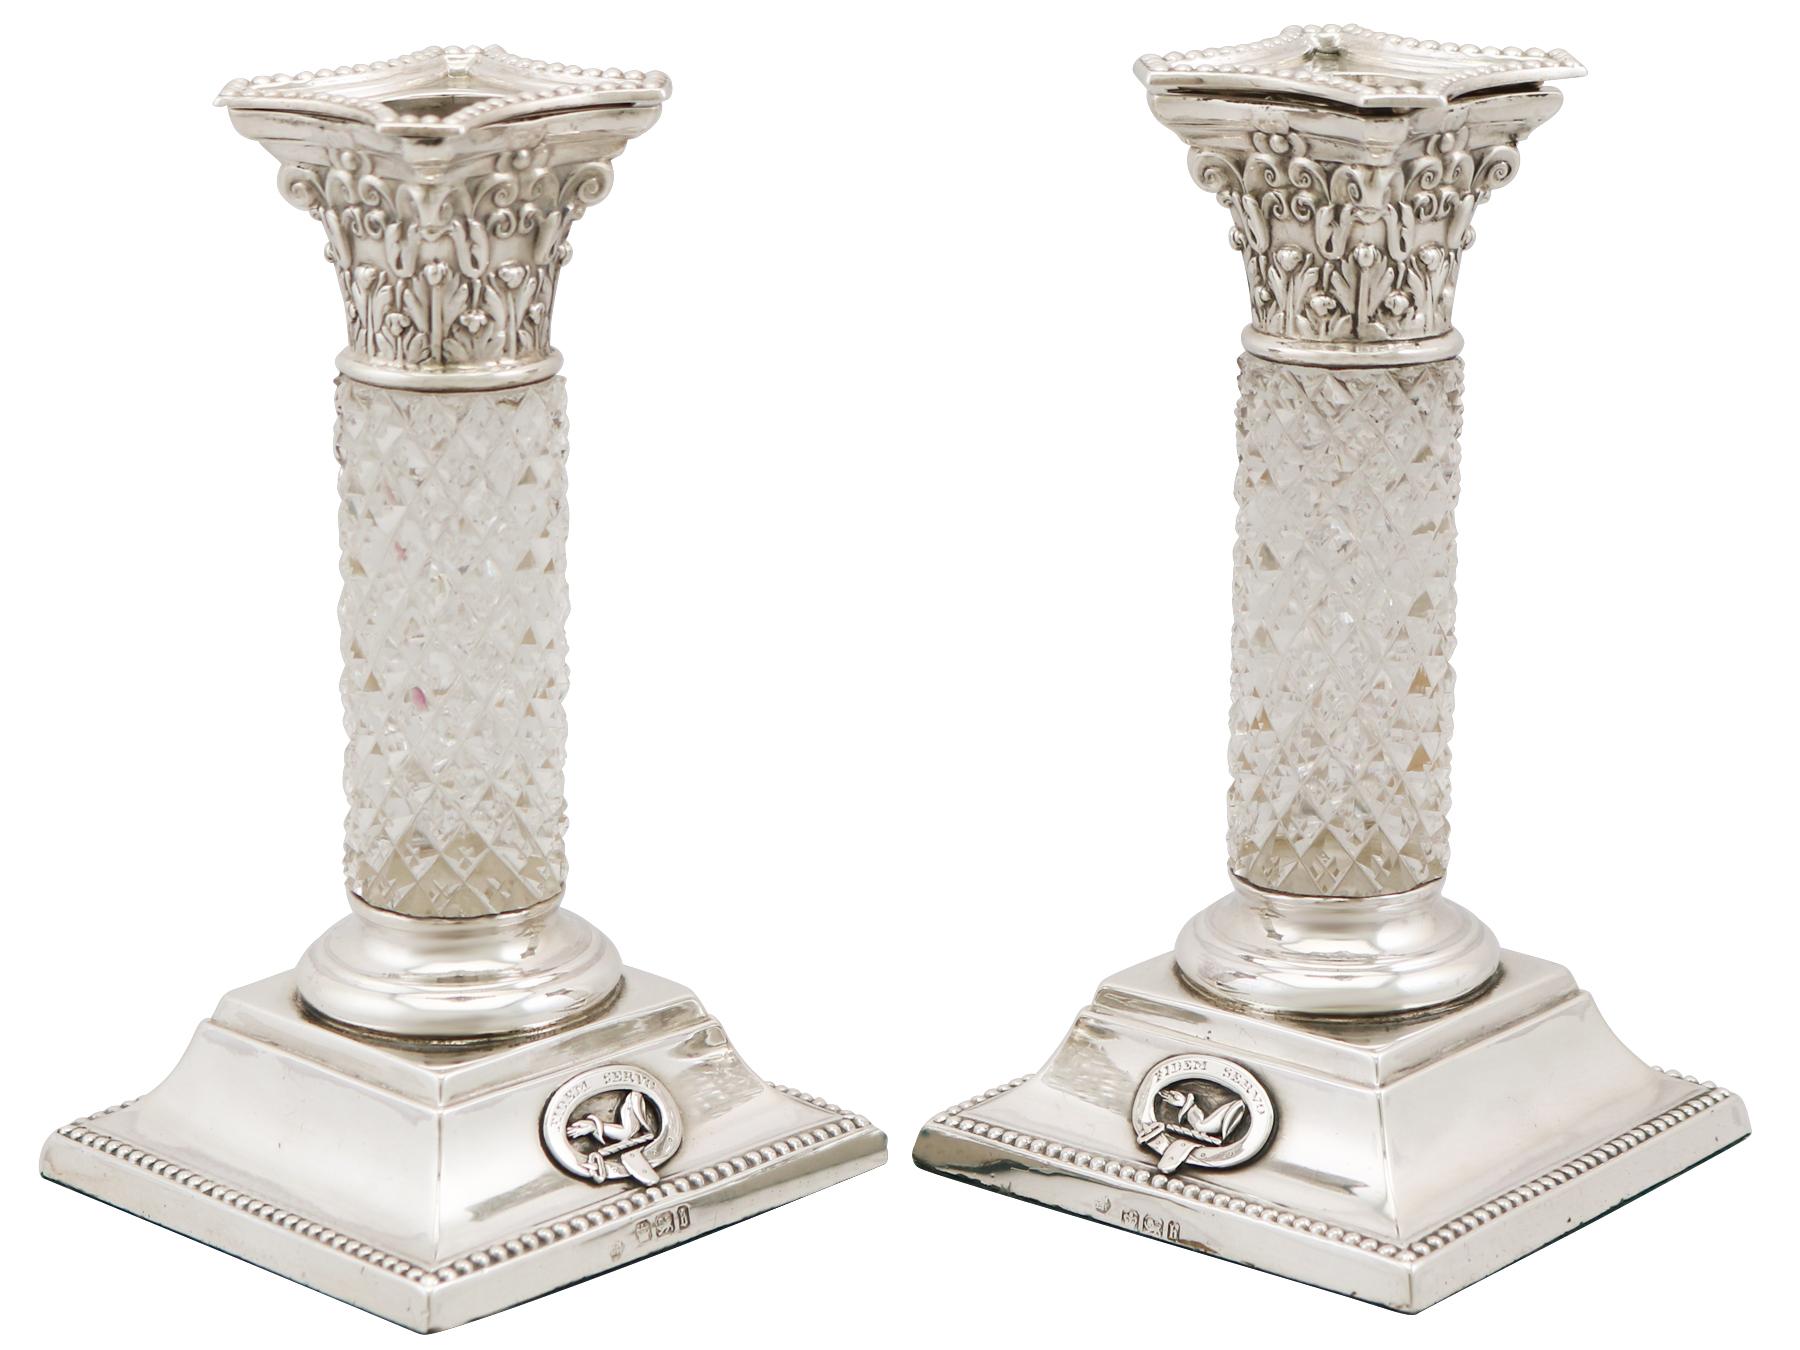 A fine and unusual pair of antique English sterling silver and cut glass candlesticks in the Corinthian style; part of our ornamental silverware collection.

These fine antique Victorian English sterling silver and cut glass candlesticks are